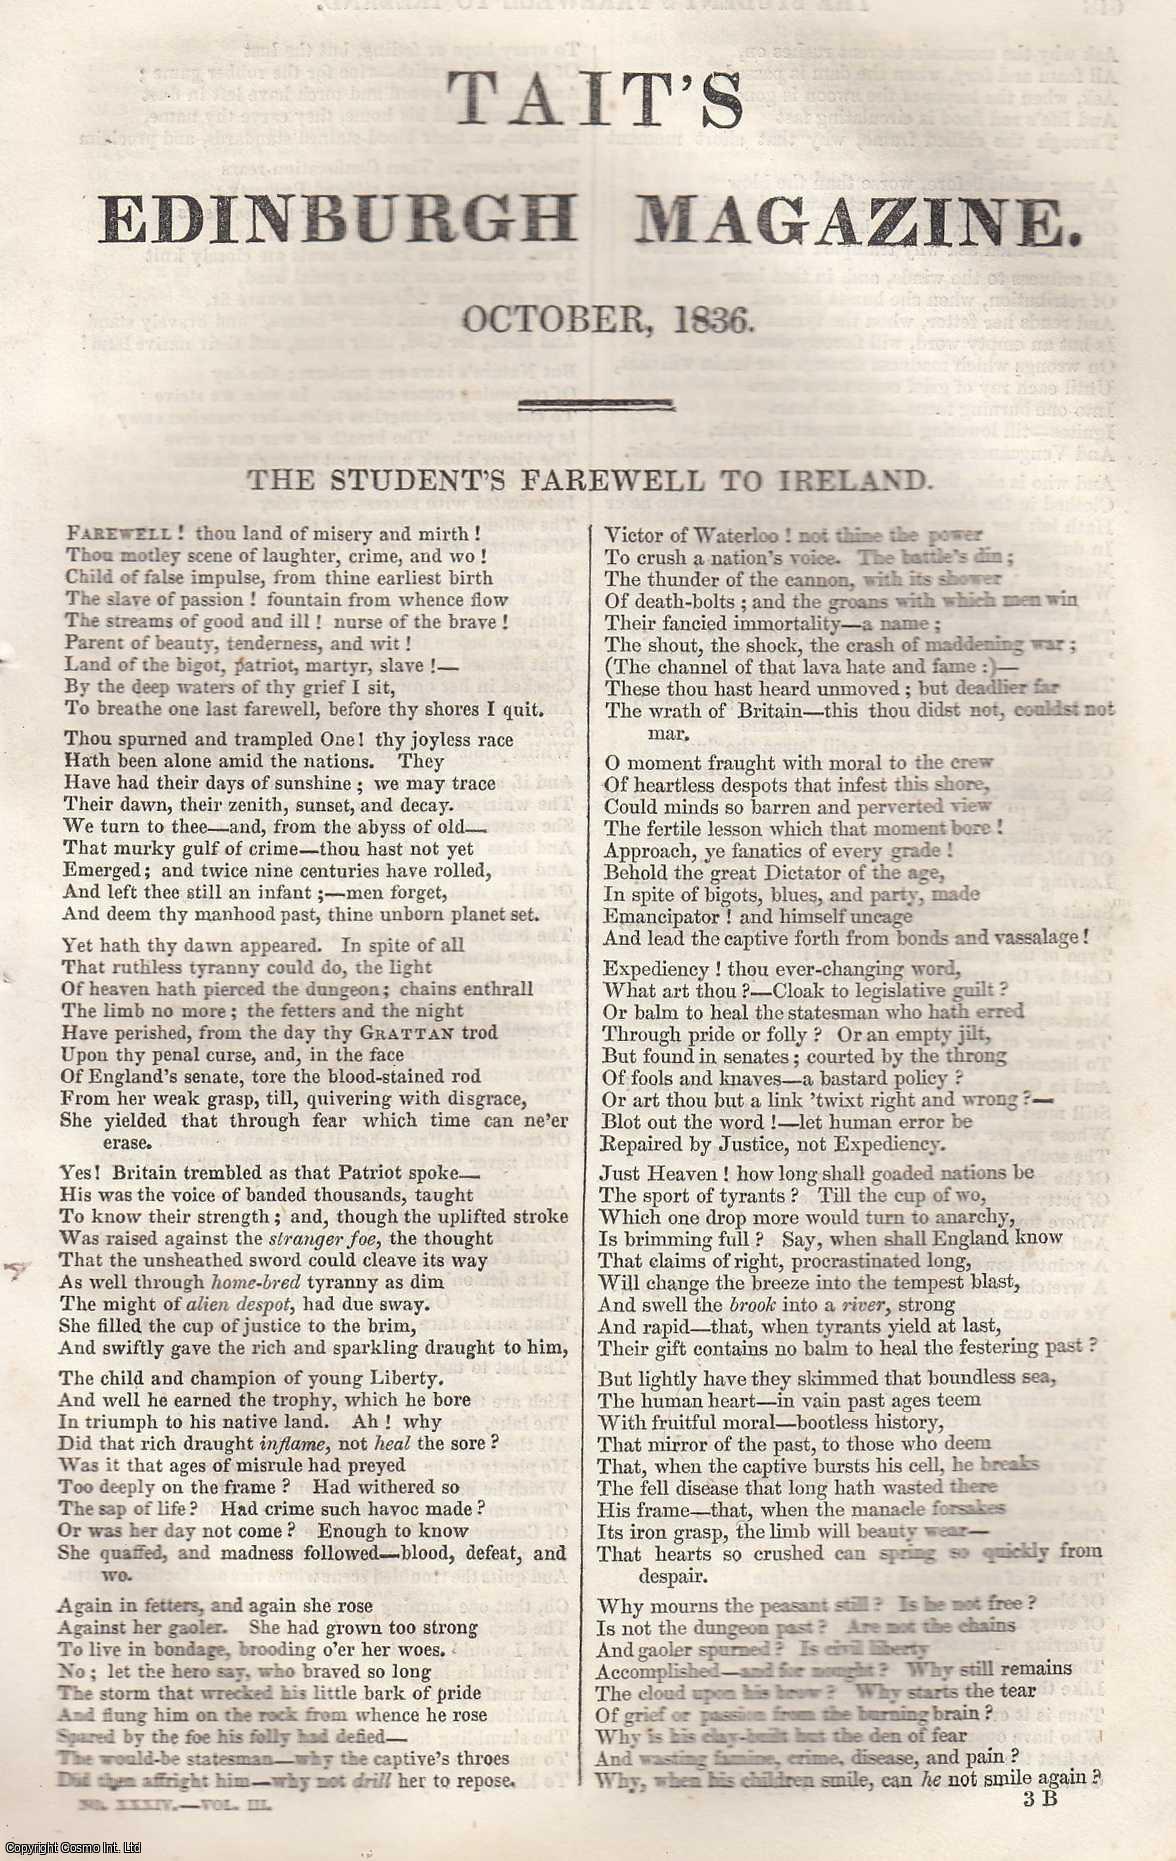 --- - The Student's Farewell to Ireland. An original article from Tait's Edinburgh Magazine, 1836.